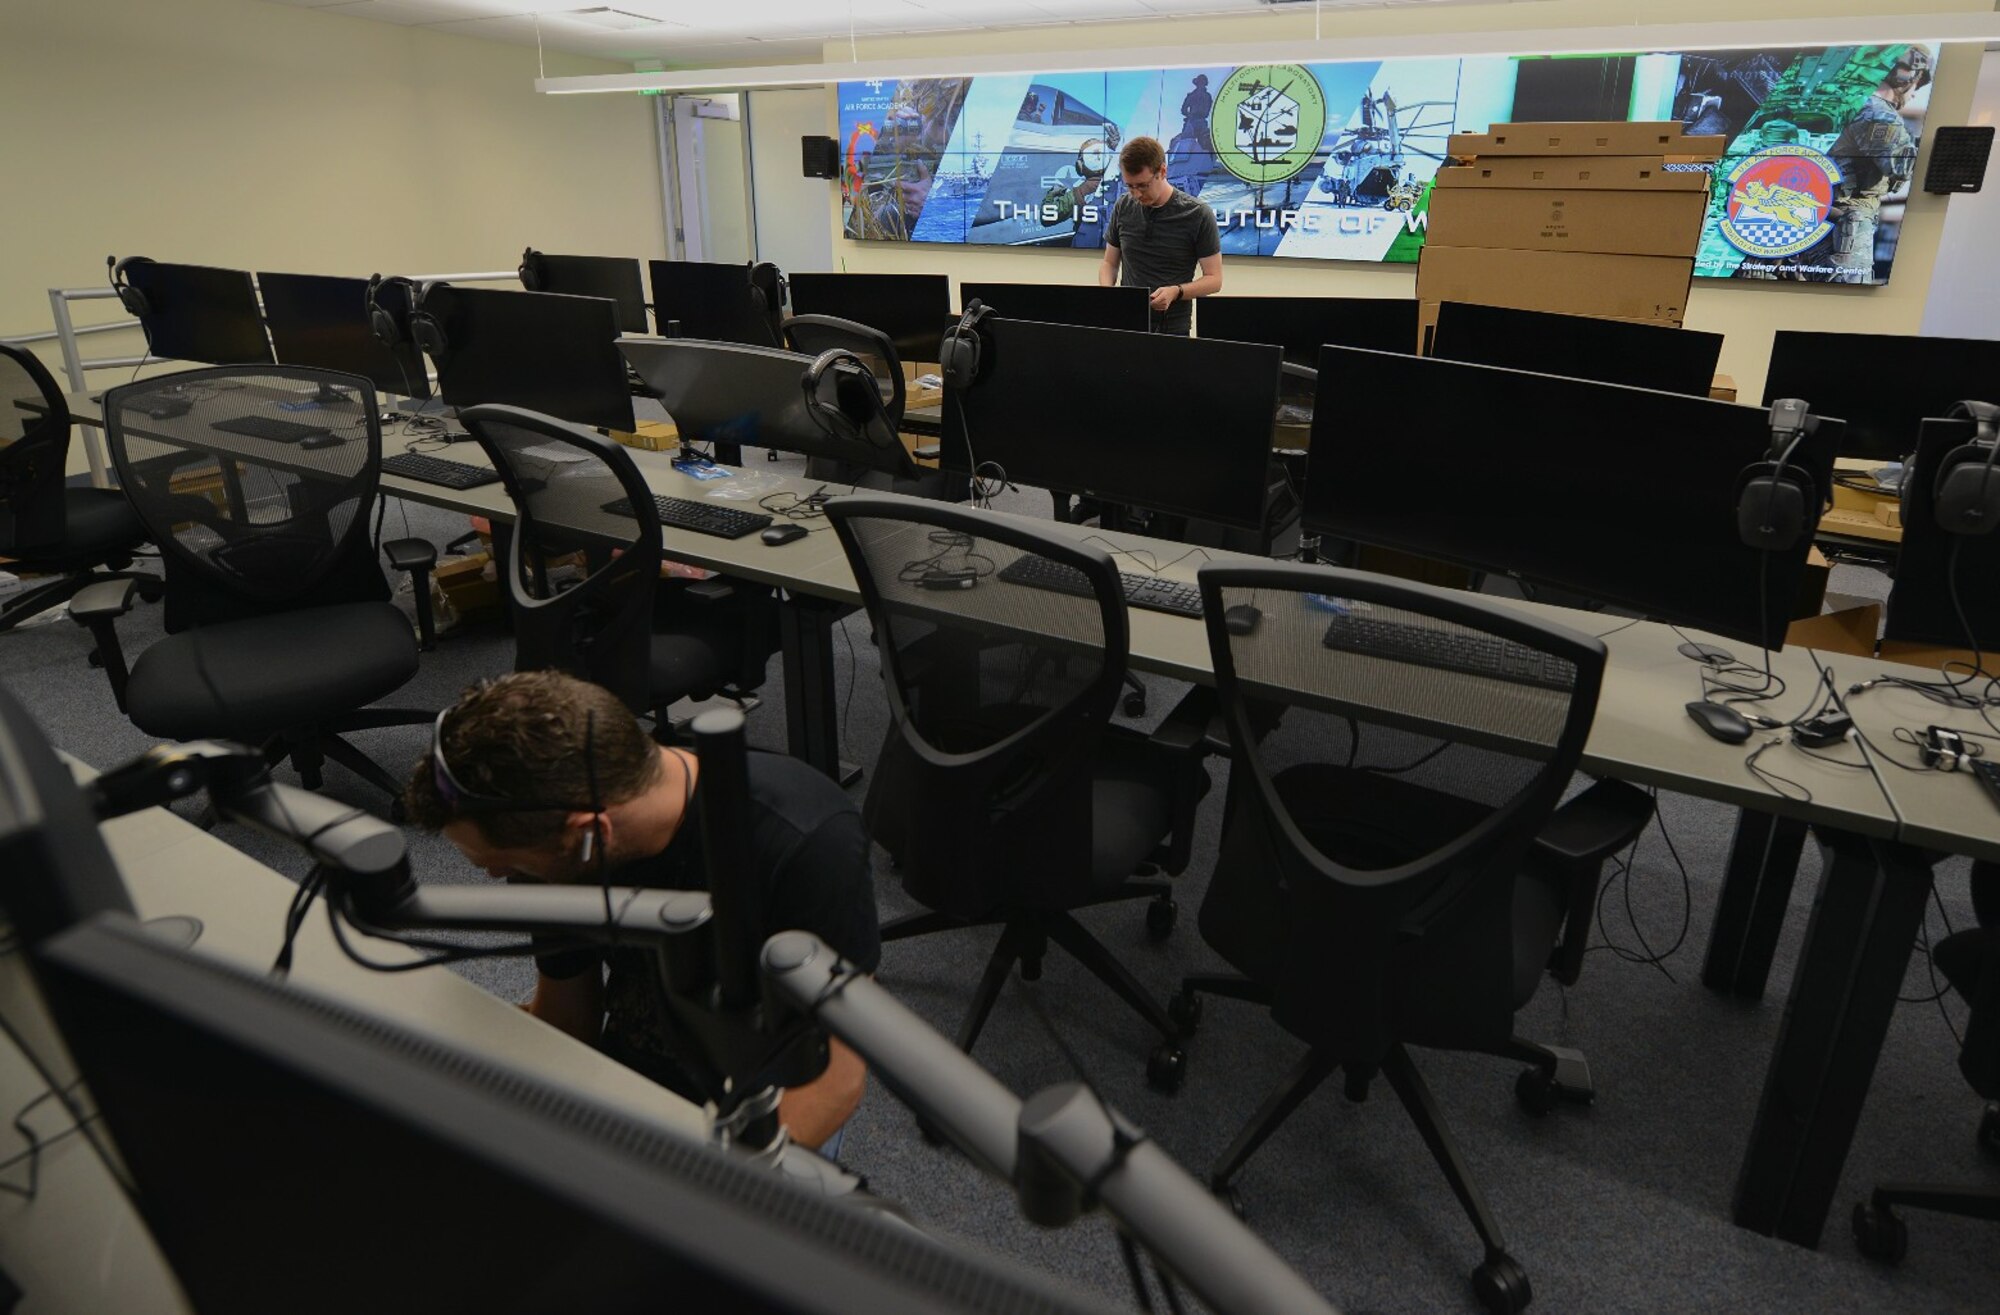 Contractors install computers in the multi domain laboratory at the U.S. Air Force Academy, July 22, 2021.